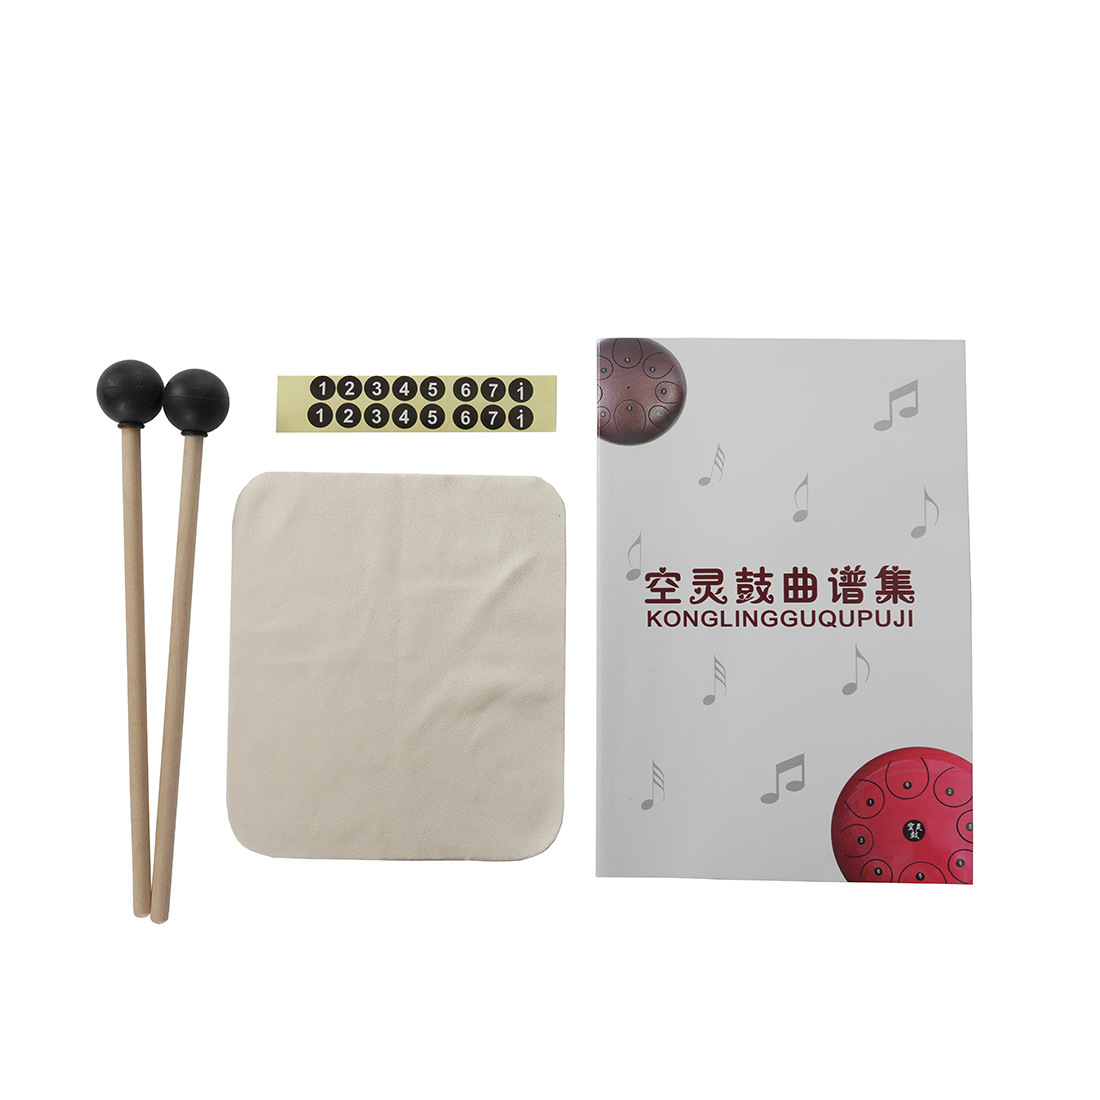 6 Inch 8 Notes G Tone Steel Tongue Drum Set Hand Pan Drum Pad Tank with Sticks Carrying Bag Gift Percussion Instruments Accessories